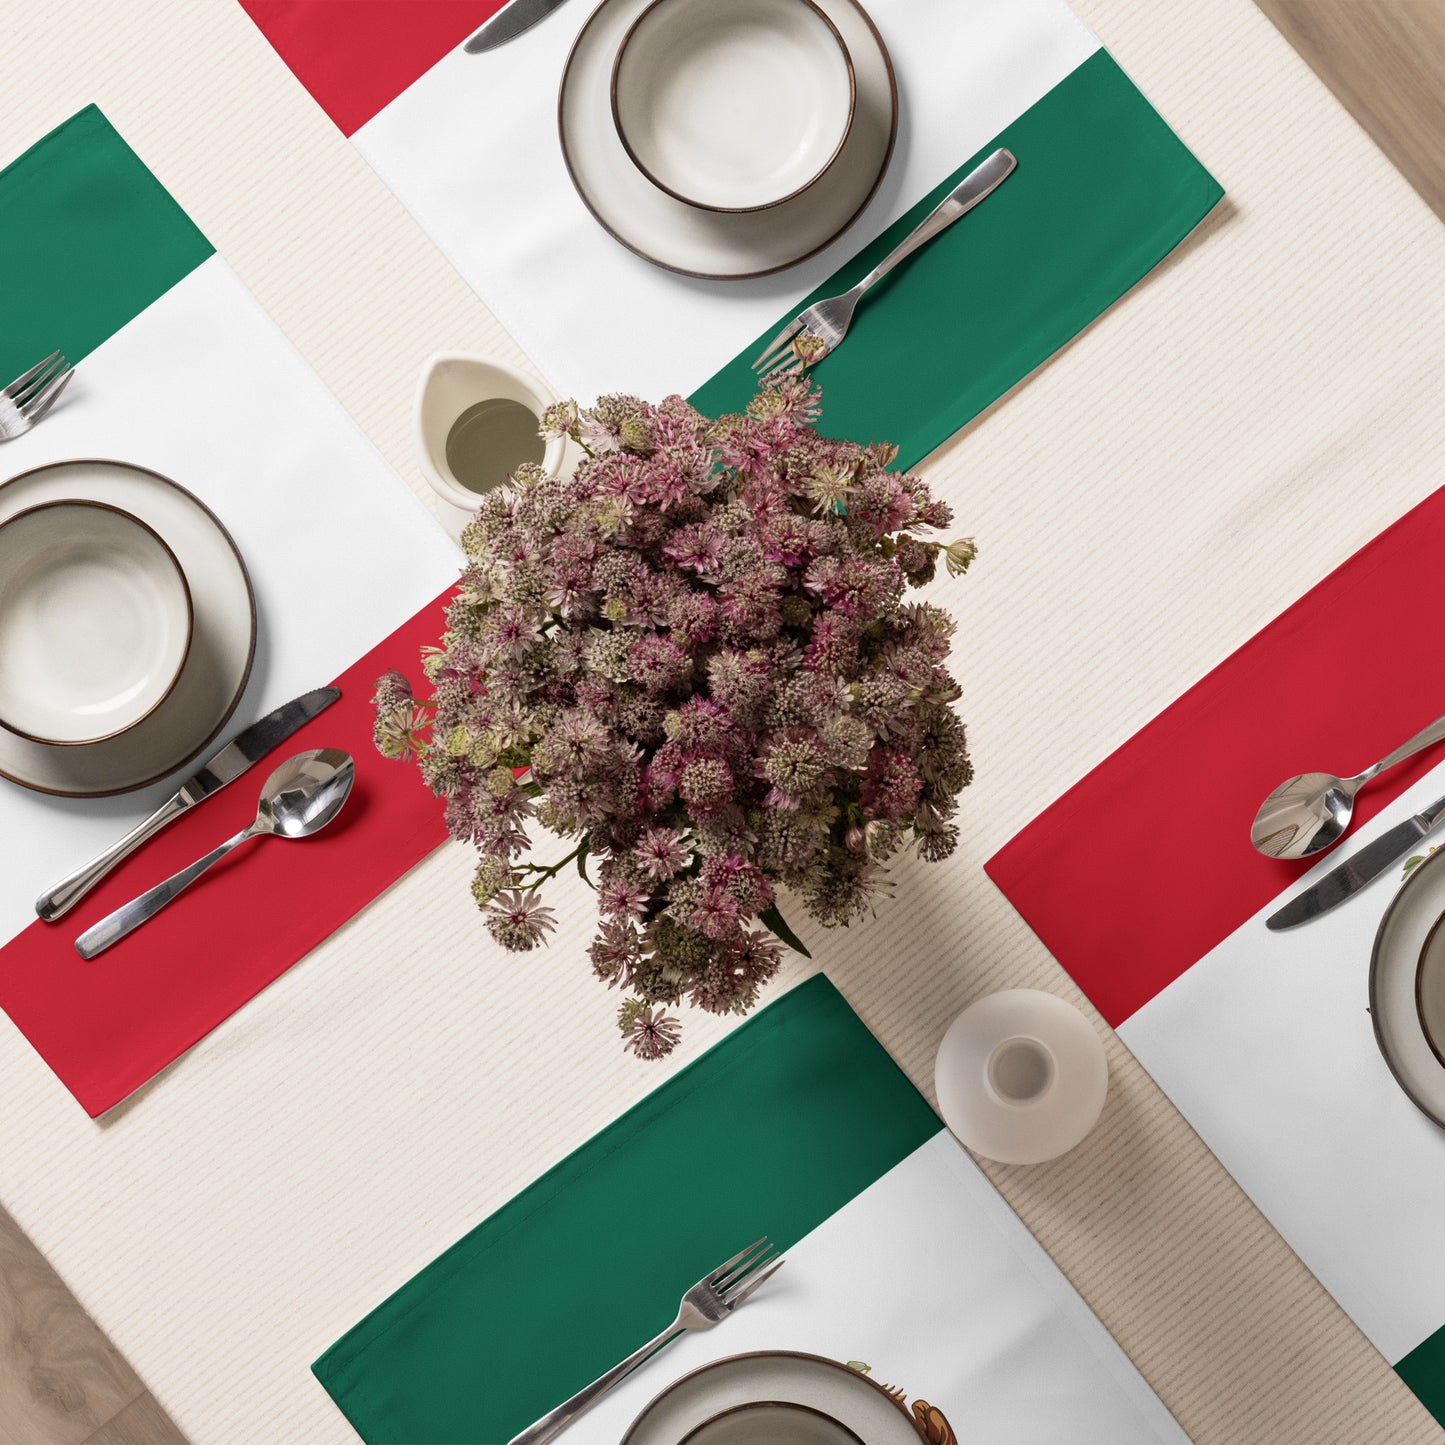 Mexican Flag Placemats 4pk